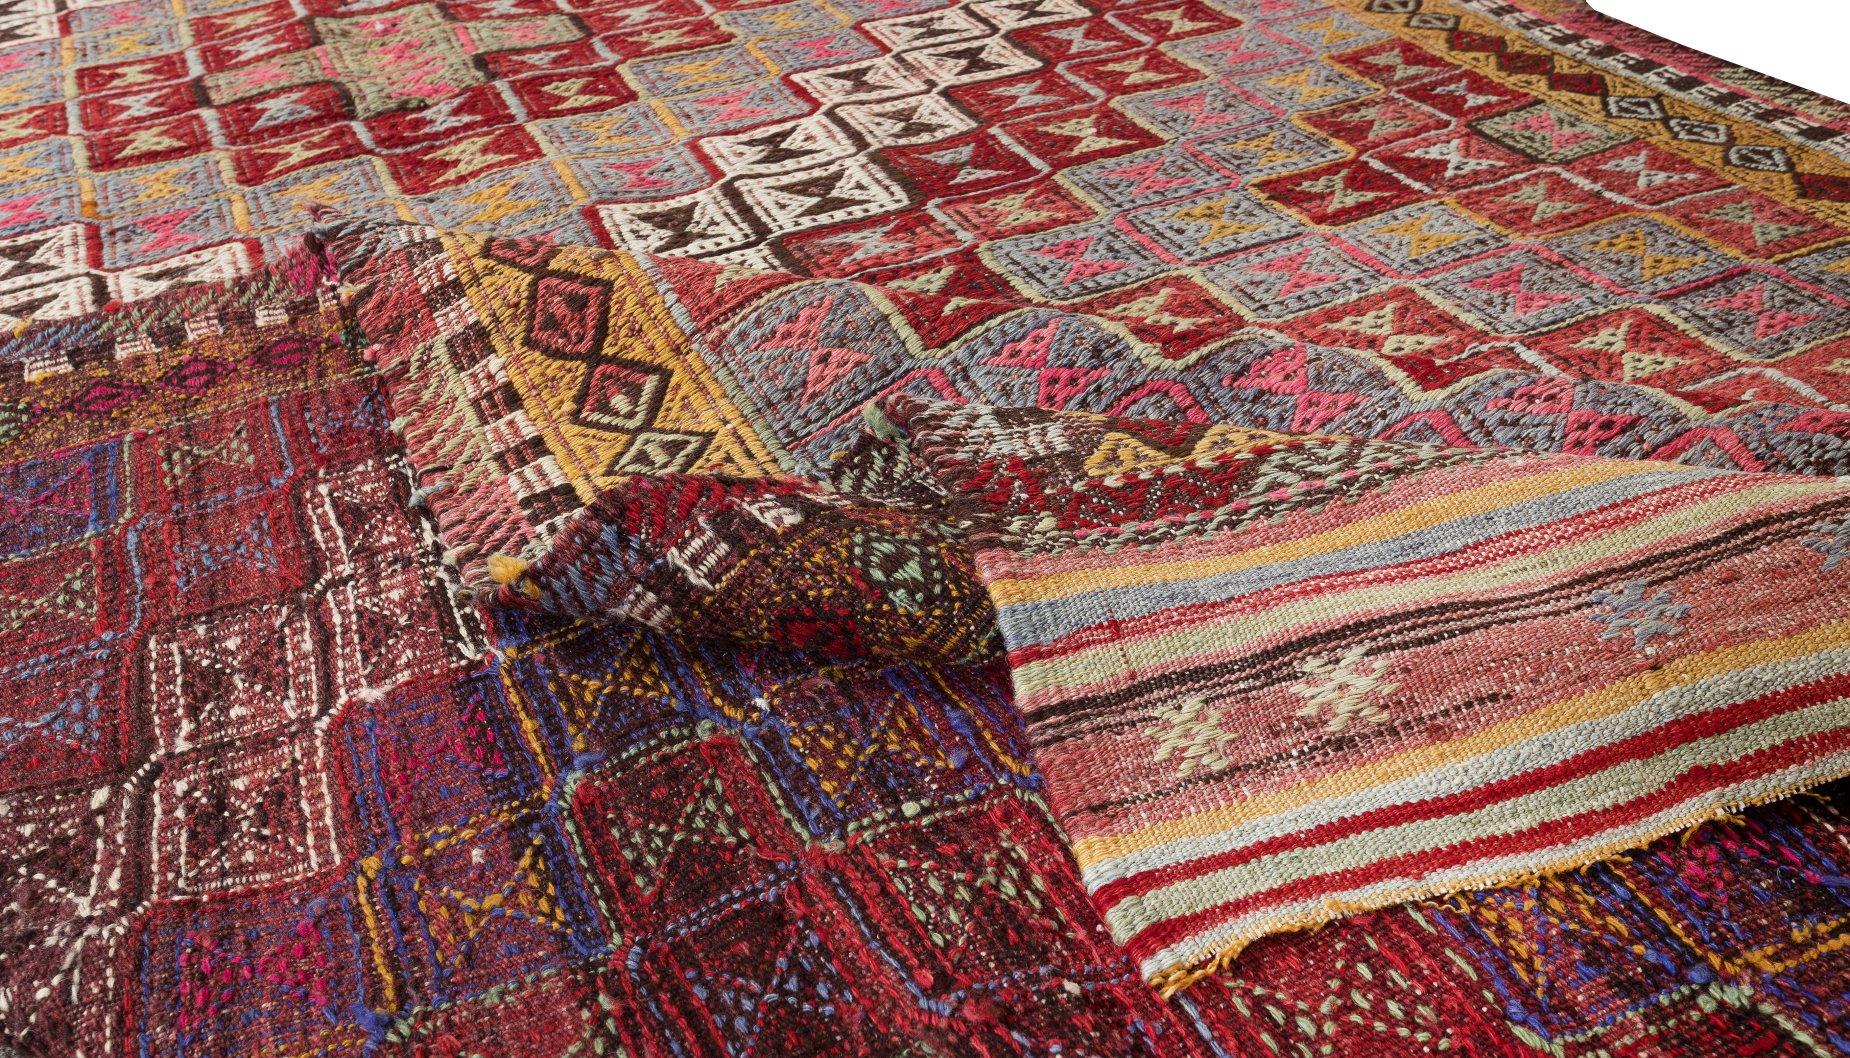 Hand-Woven 5.3x8.3 Ft One-of-a-Kind Geometric Vintage Turkish Jijim Kilim Rug Made of Wool For Sale